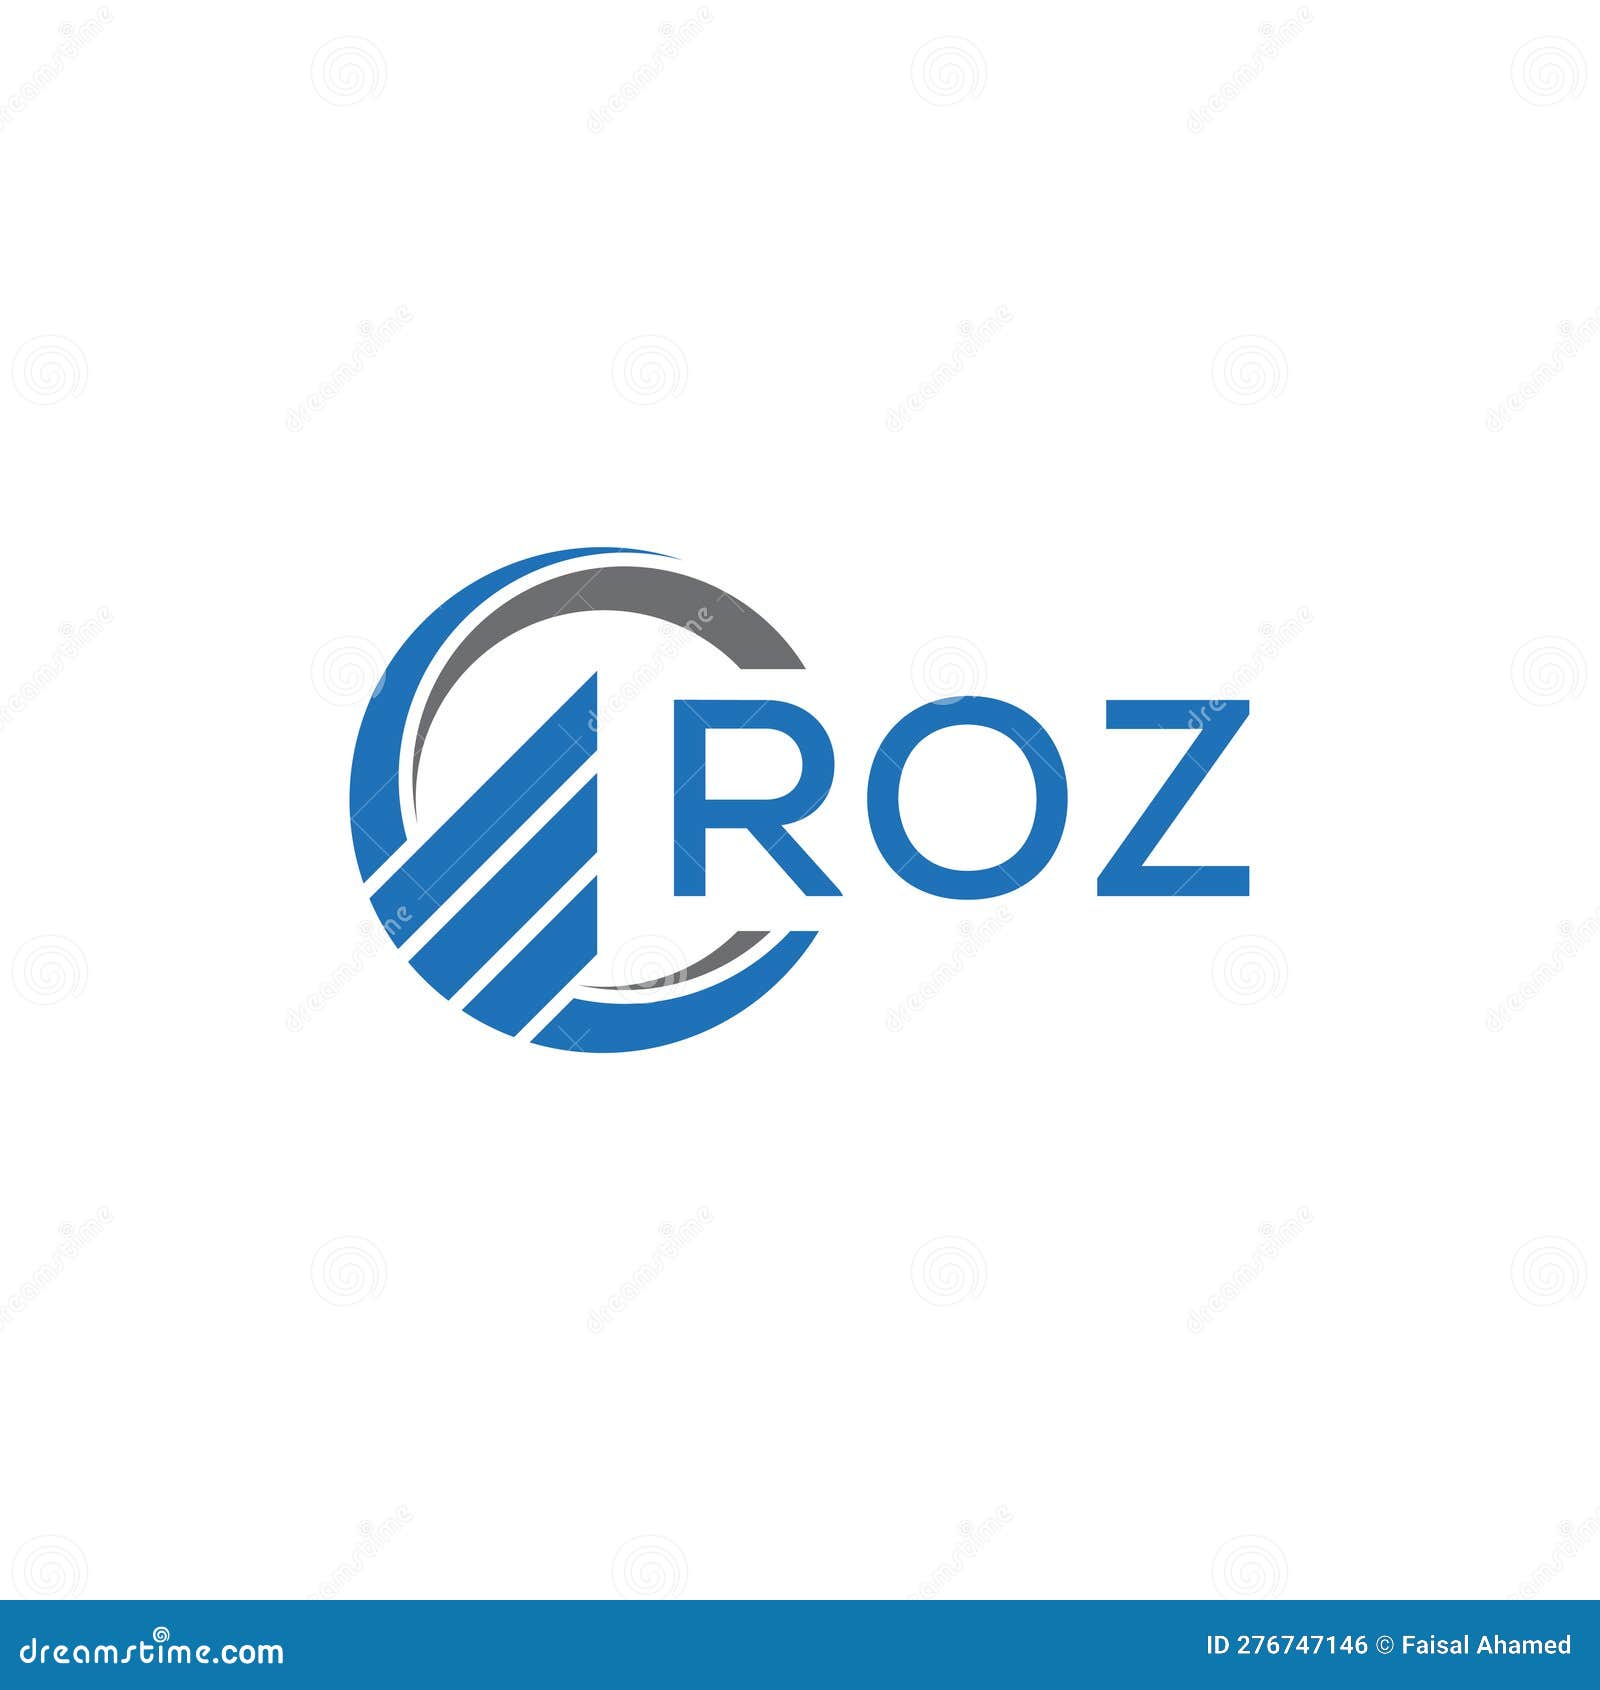 ROZ Abstract Technology Logo Design on White Background. ROZ Creative ...